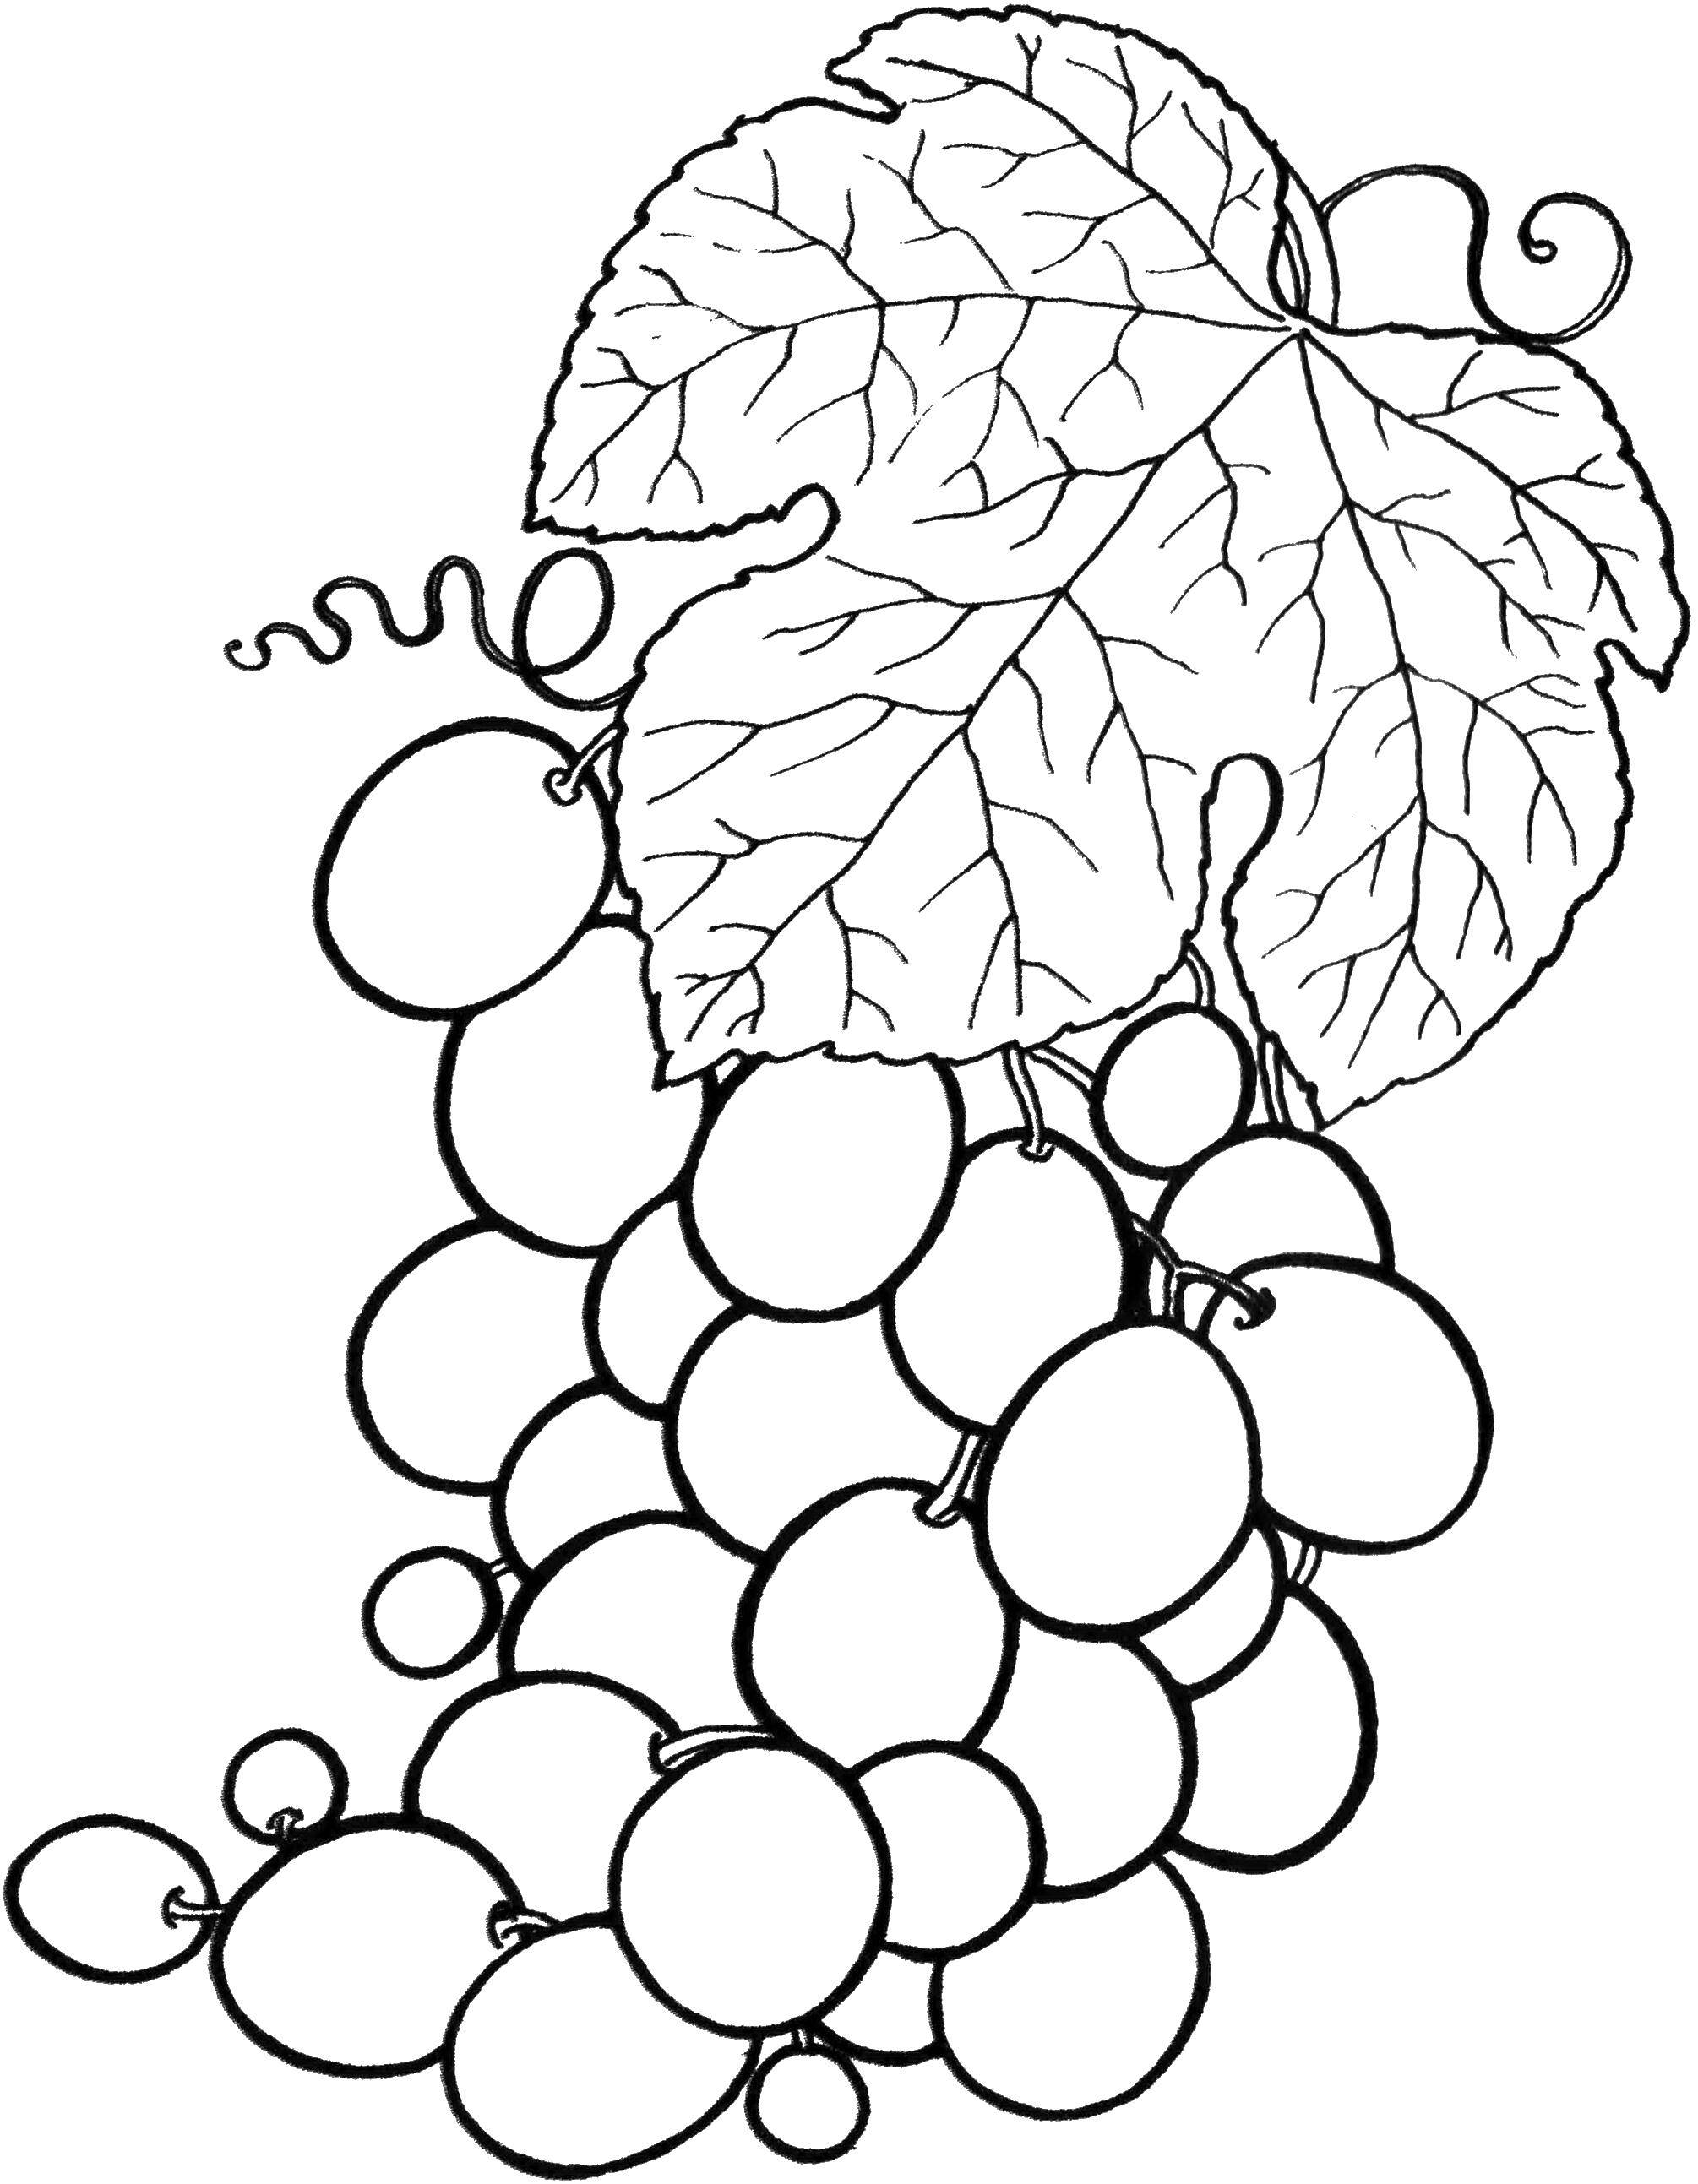 Coloring The tendrils of a grapevine. Category grapes. Tags:  Berries.